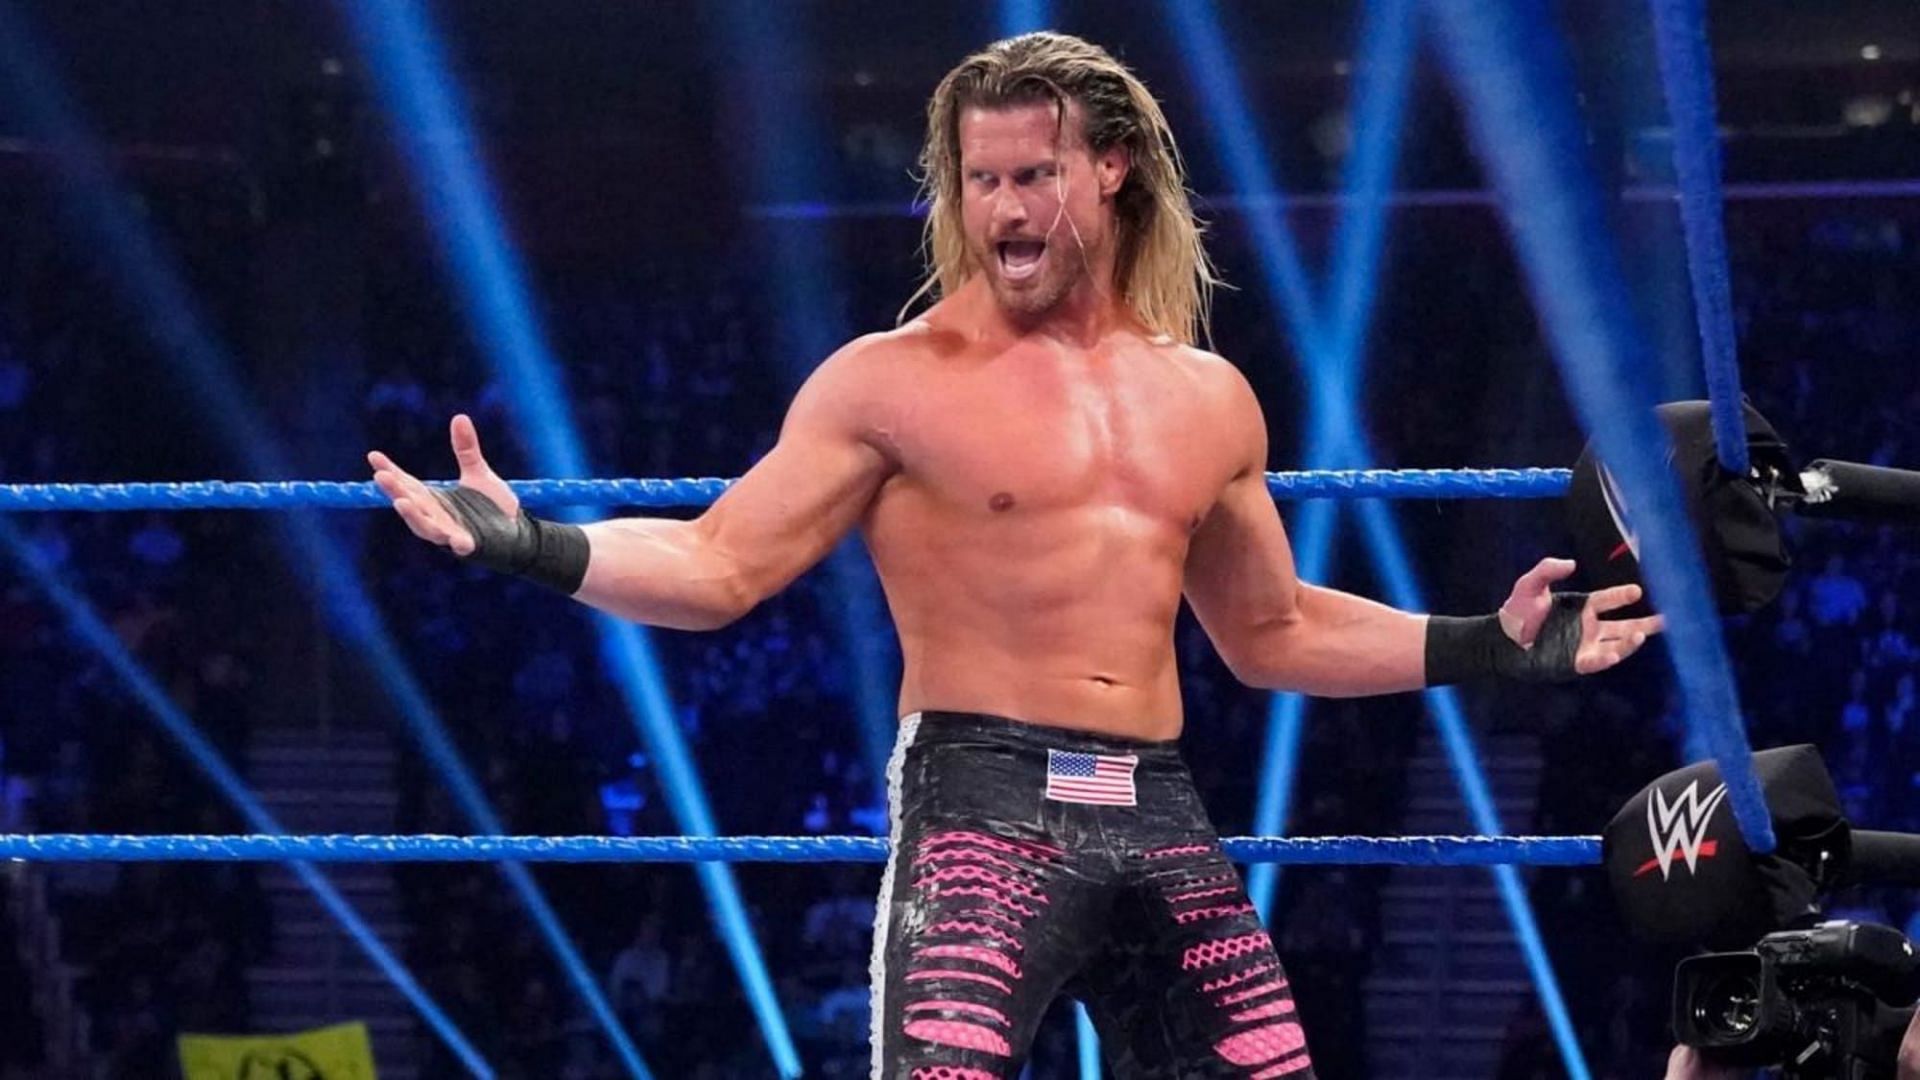 Dolph Ziggler faced Austin Theory on RAW